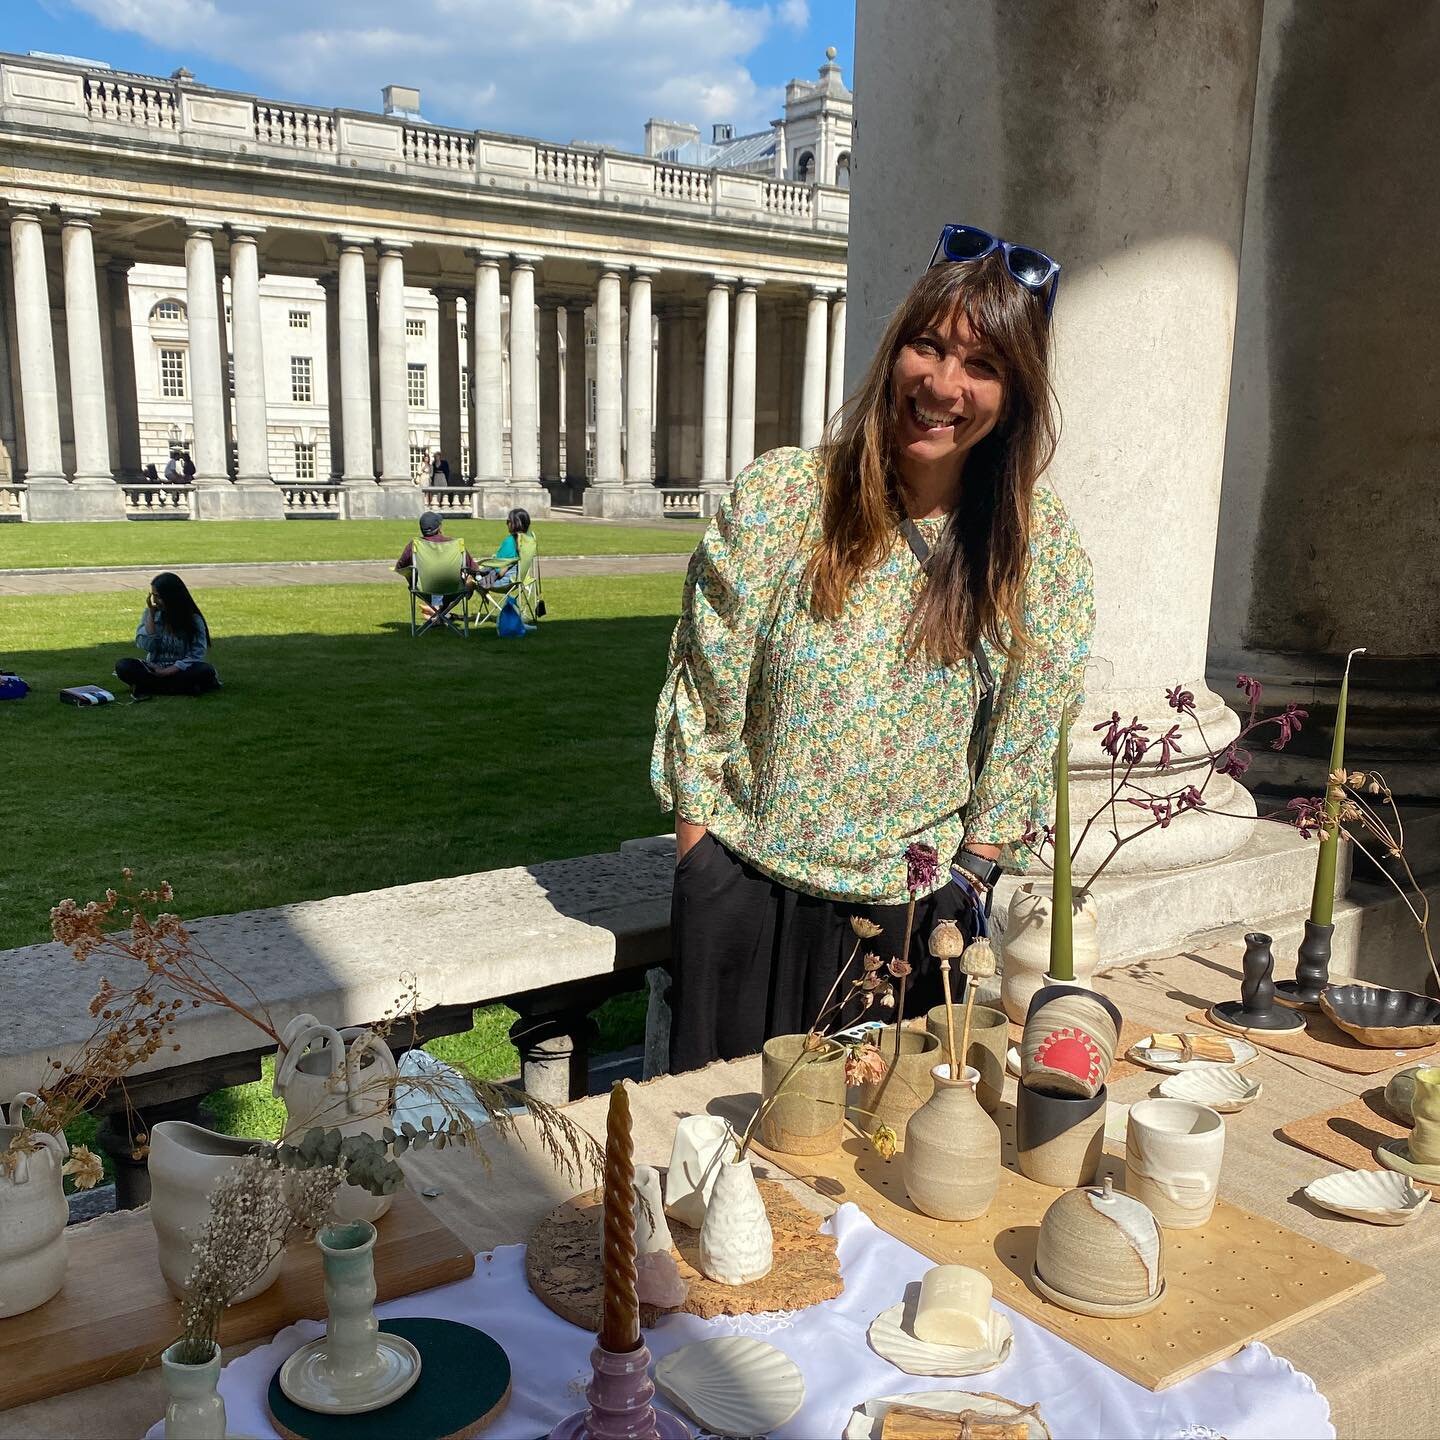 Coming to you again this weekend at the #royalnavalcollege with @london makers market. I won&rsquo;t be there selling, but I will be there buying. Head over to this gorgeous setting this weekend and support independent. 🤎